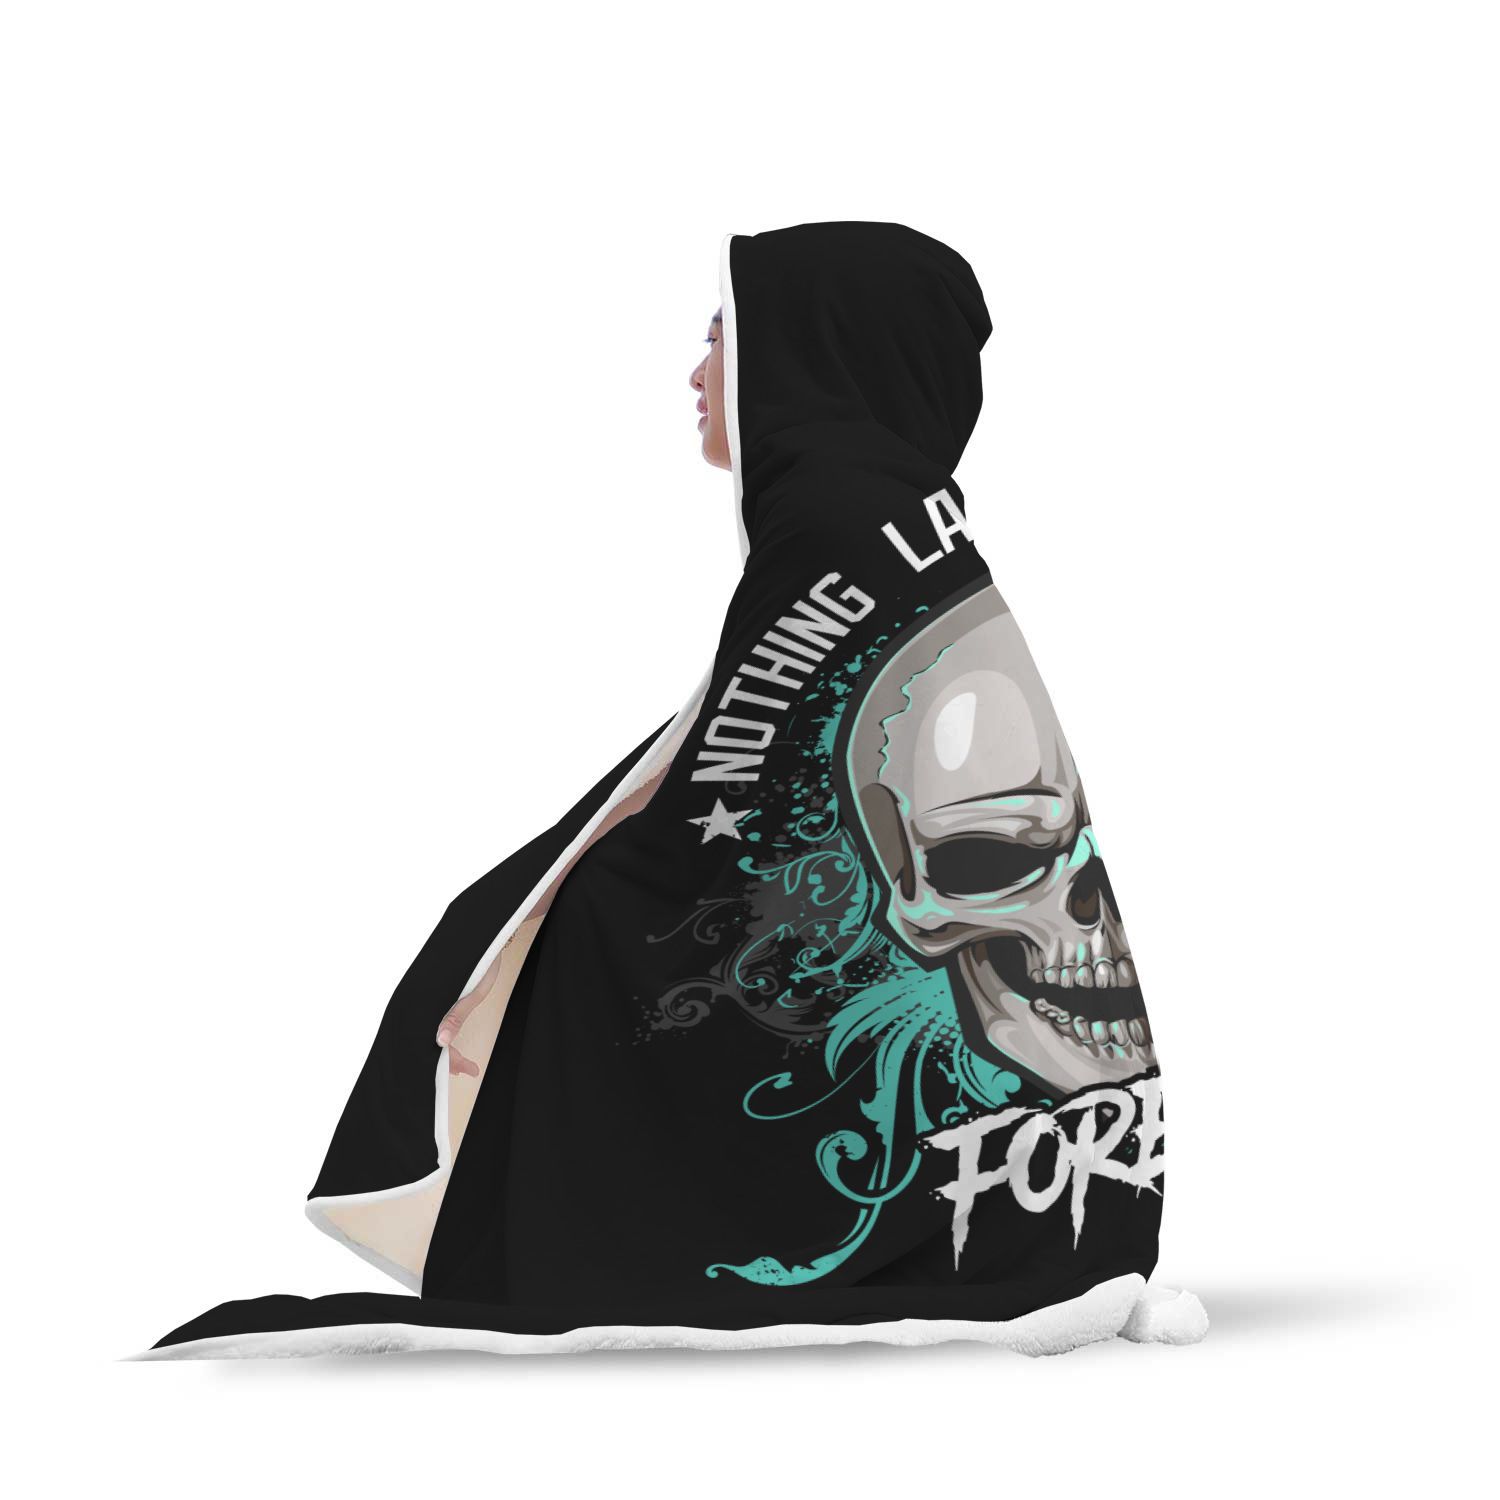 Nothing Lasts Forever Hooded Blanket - Perfenq